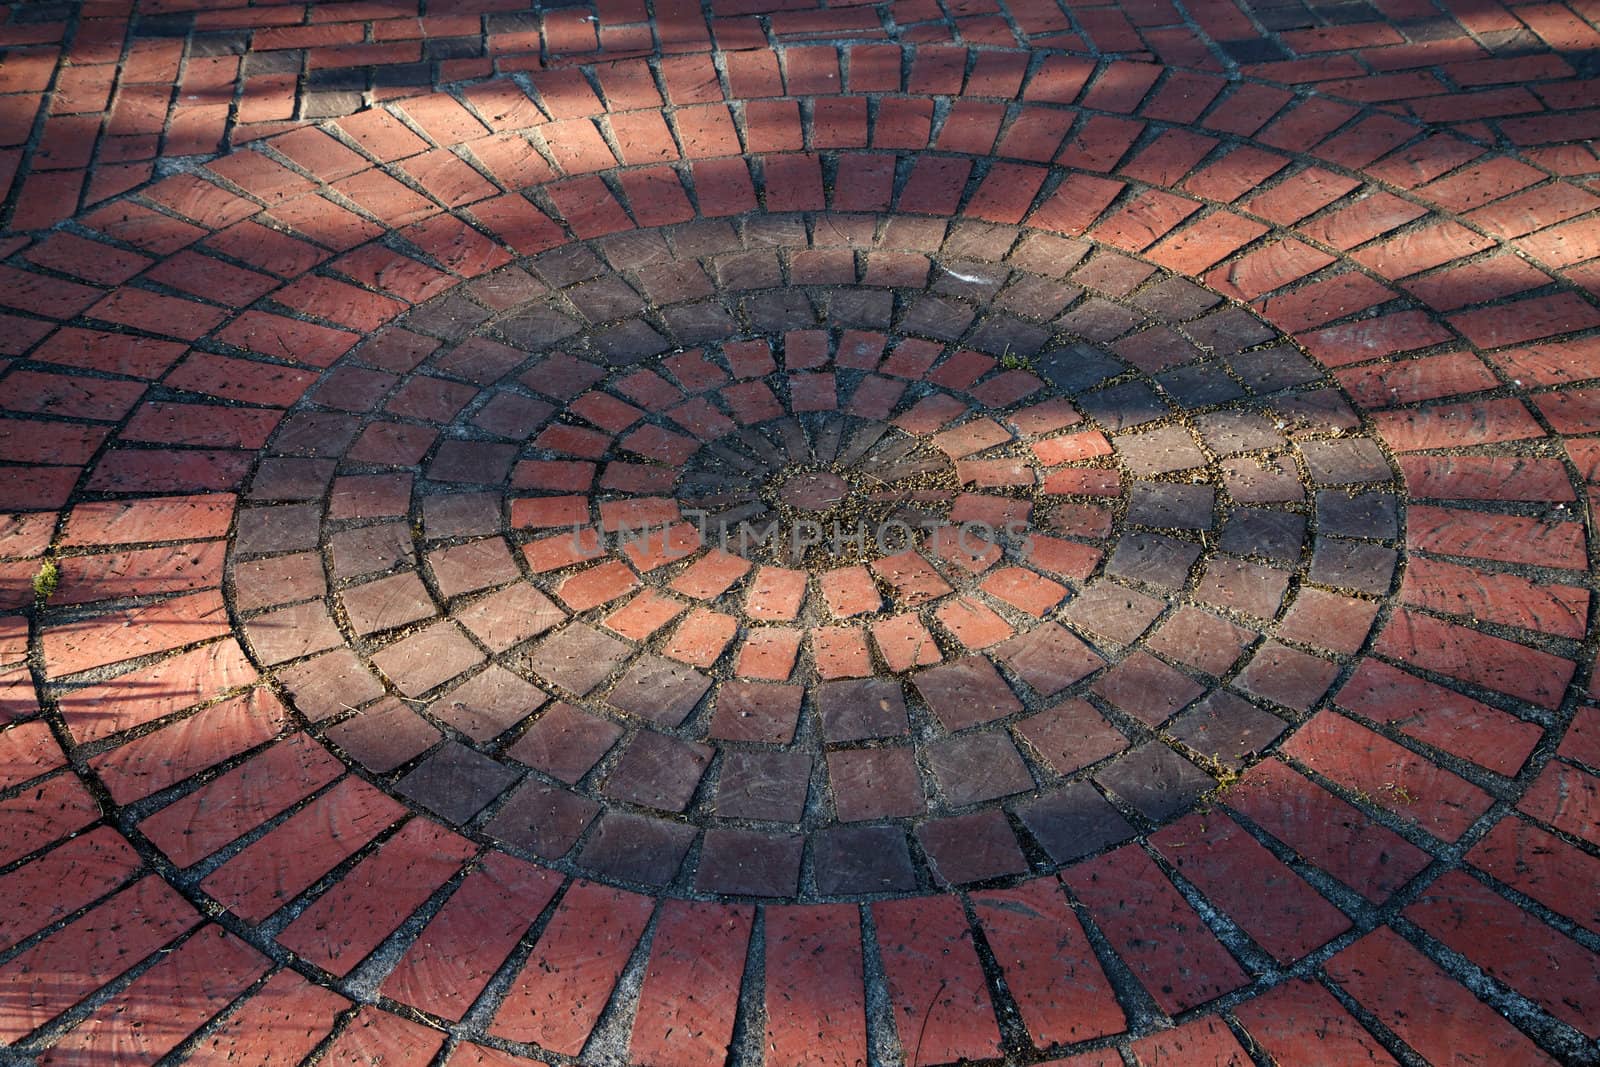 Circles of different colored and sized red bricks